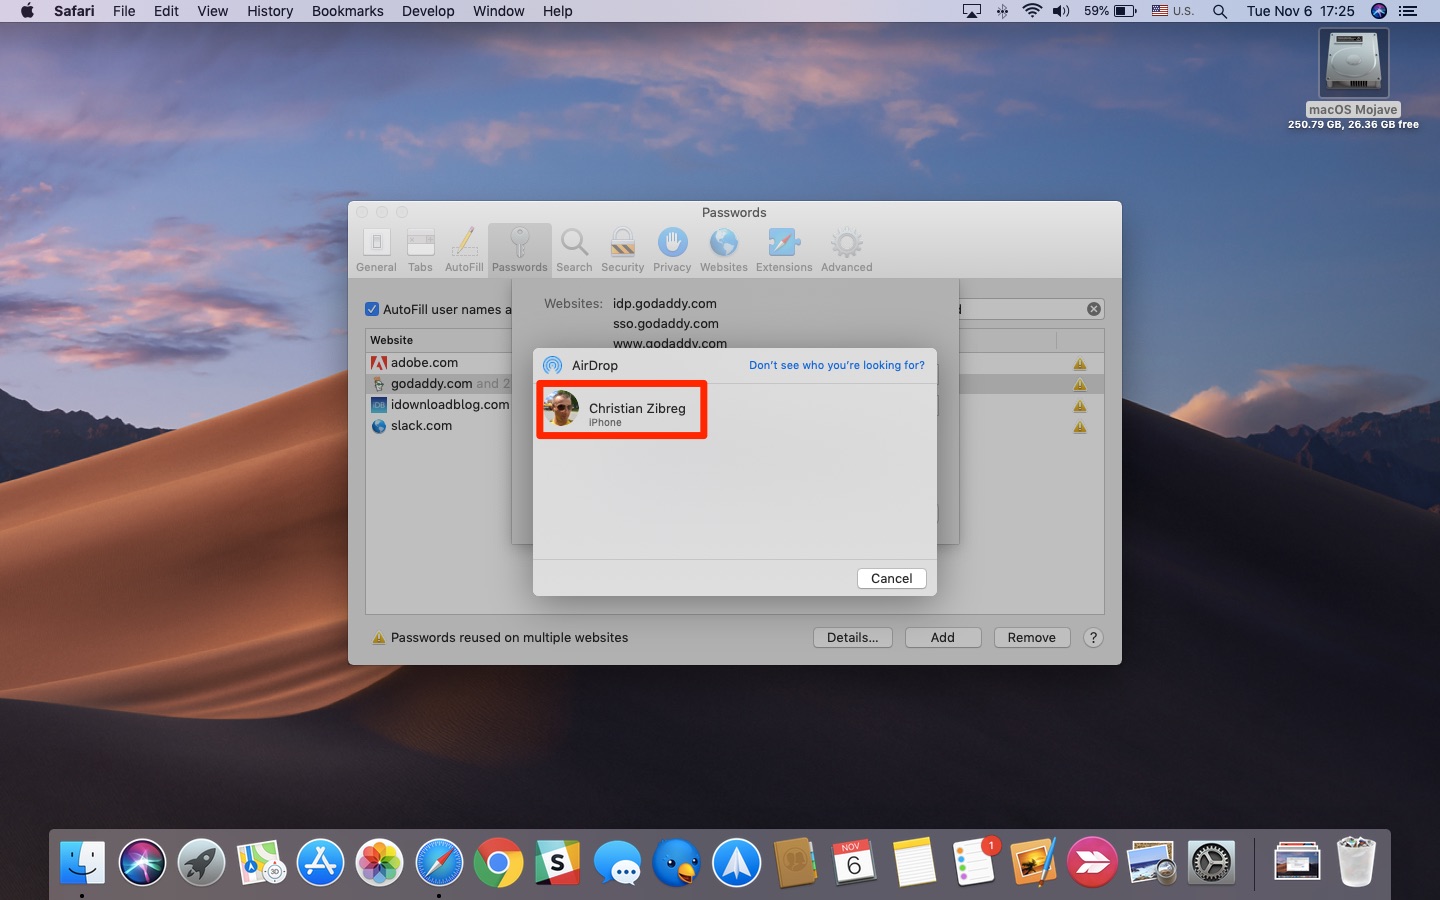 How to AirDrop Passwords Between Nearby iPhone, iPad and Mac devices?